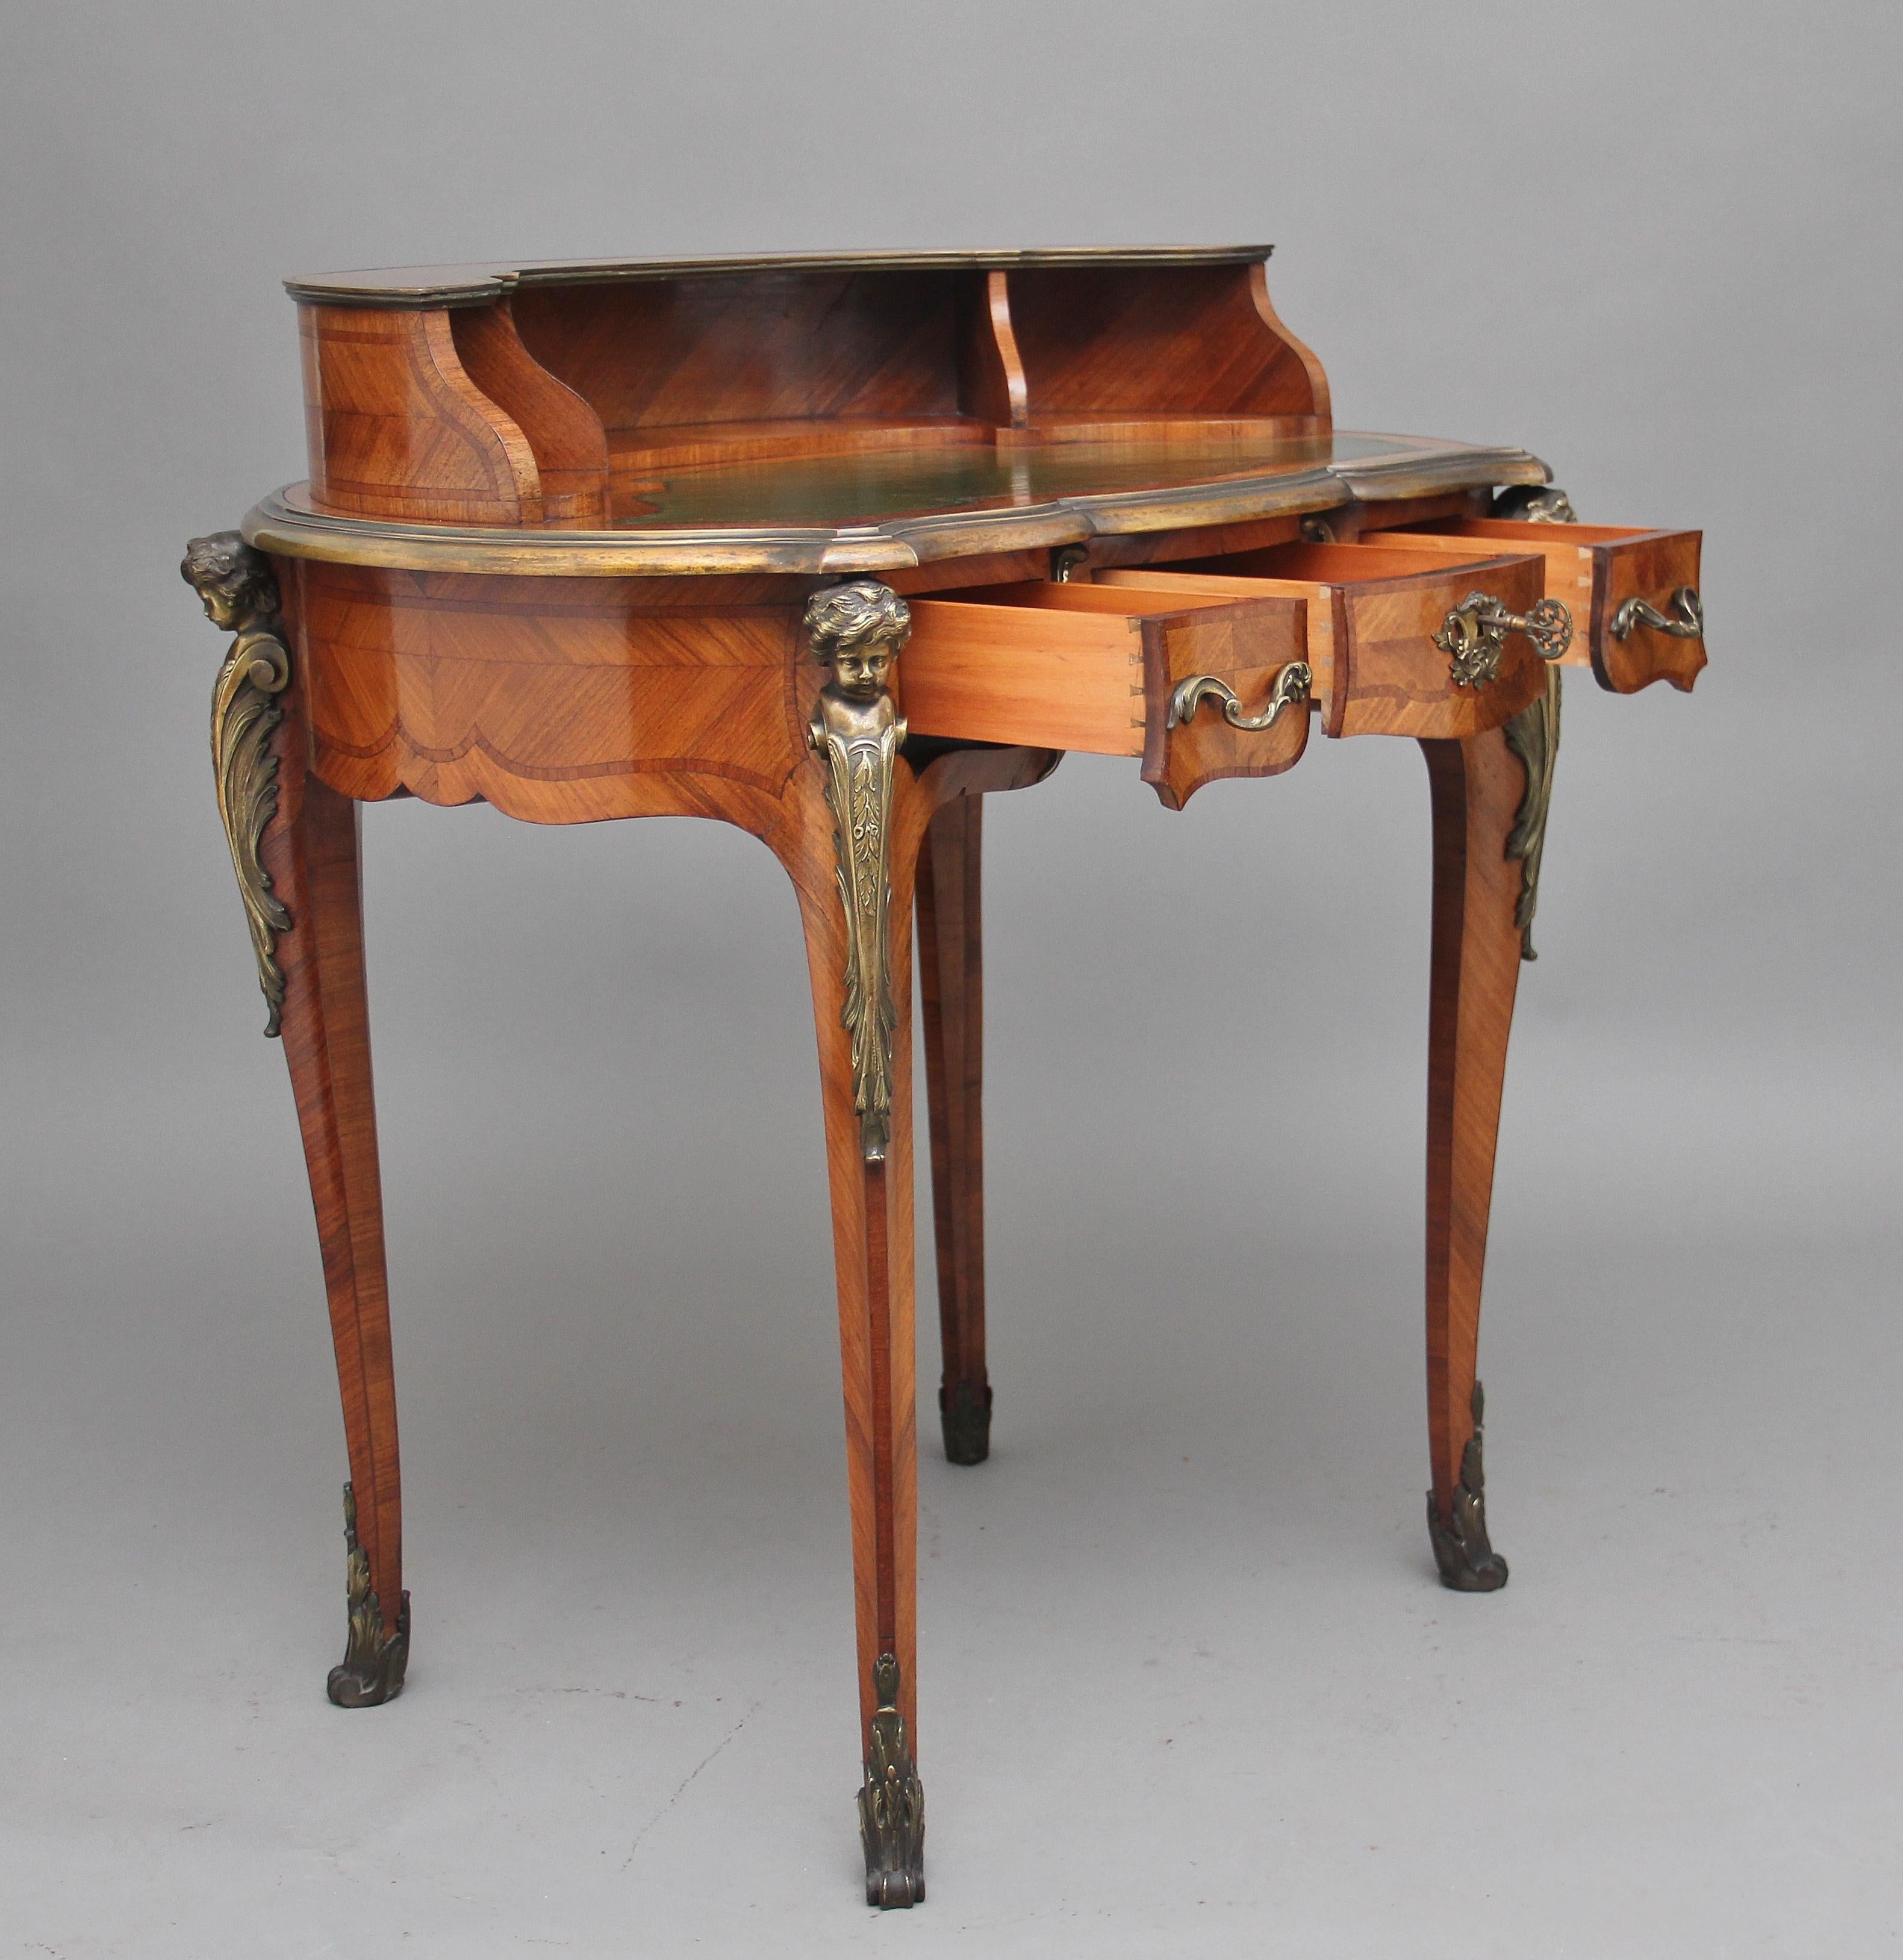 A free standing 19th century French Kingwood and ormolu writing table, having a curved superstructure with divided compartments, the shaped top with a brass moulded edge, green leather writing surface decorated with blind and gold tooling, the table